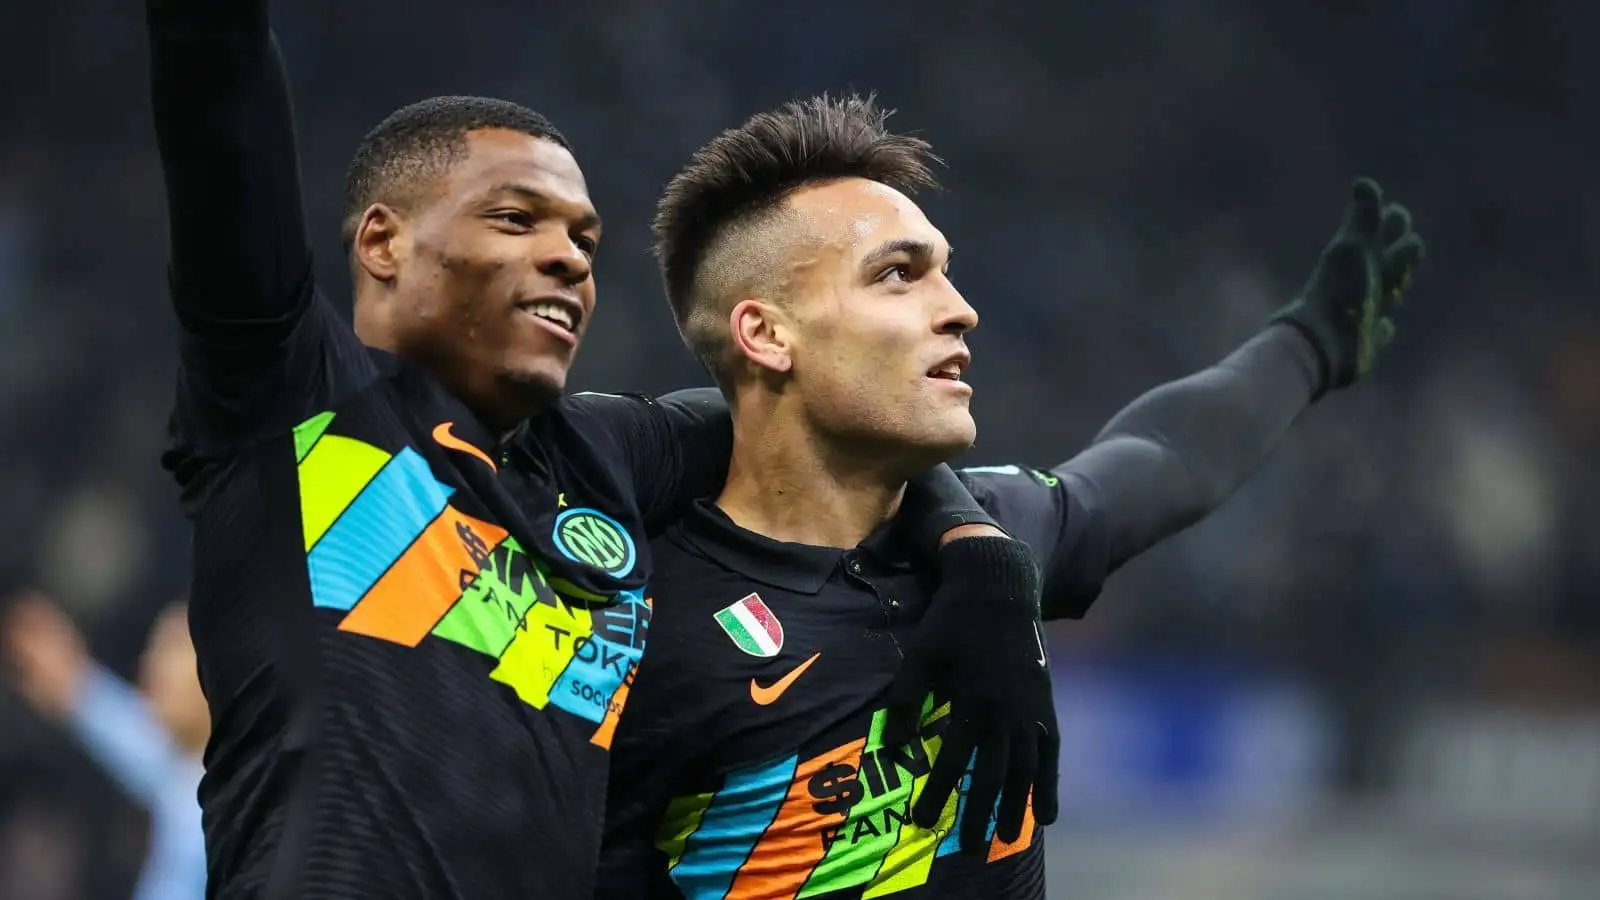 Denzel Dumfries of FC Internazionale and Lautaro Martinez of FC Internazionale celebrate during the Serie A 2021/22 football match between FC Internazionale and SS Lazio at Giuseppe Meazza Stadium, Milan